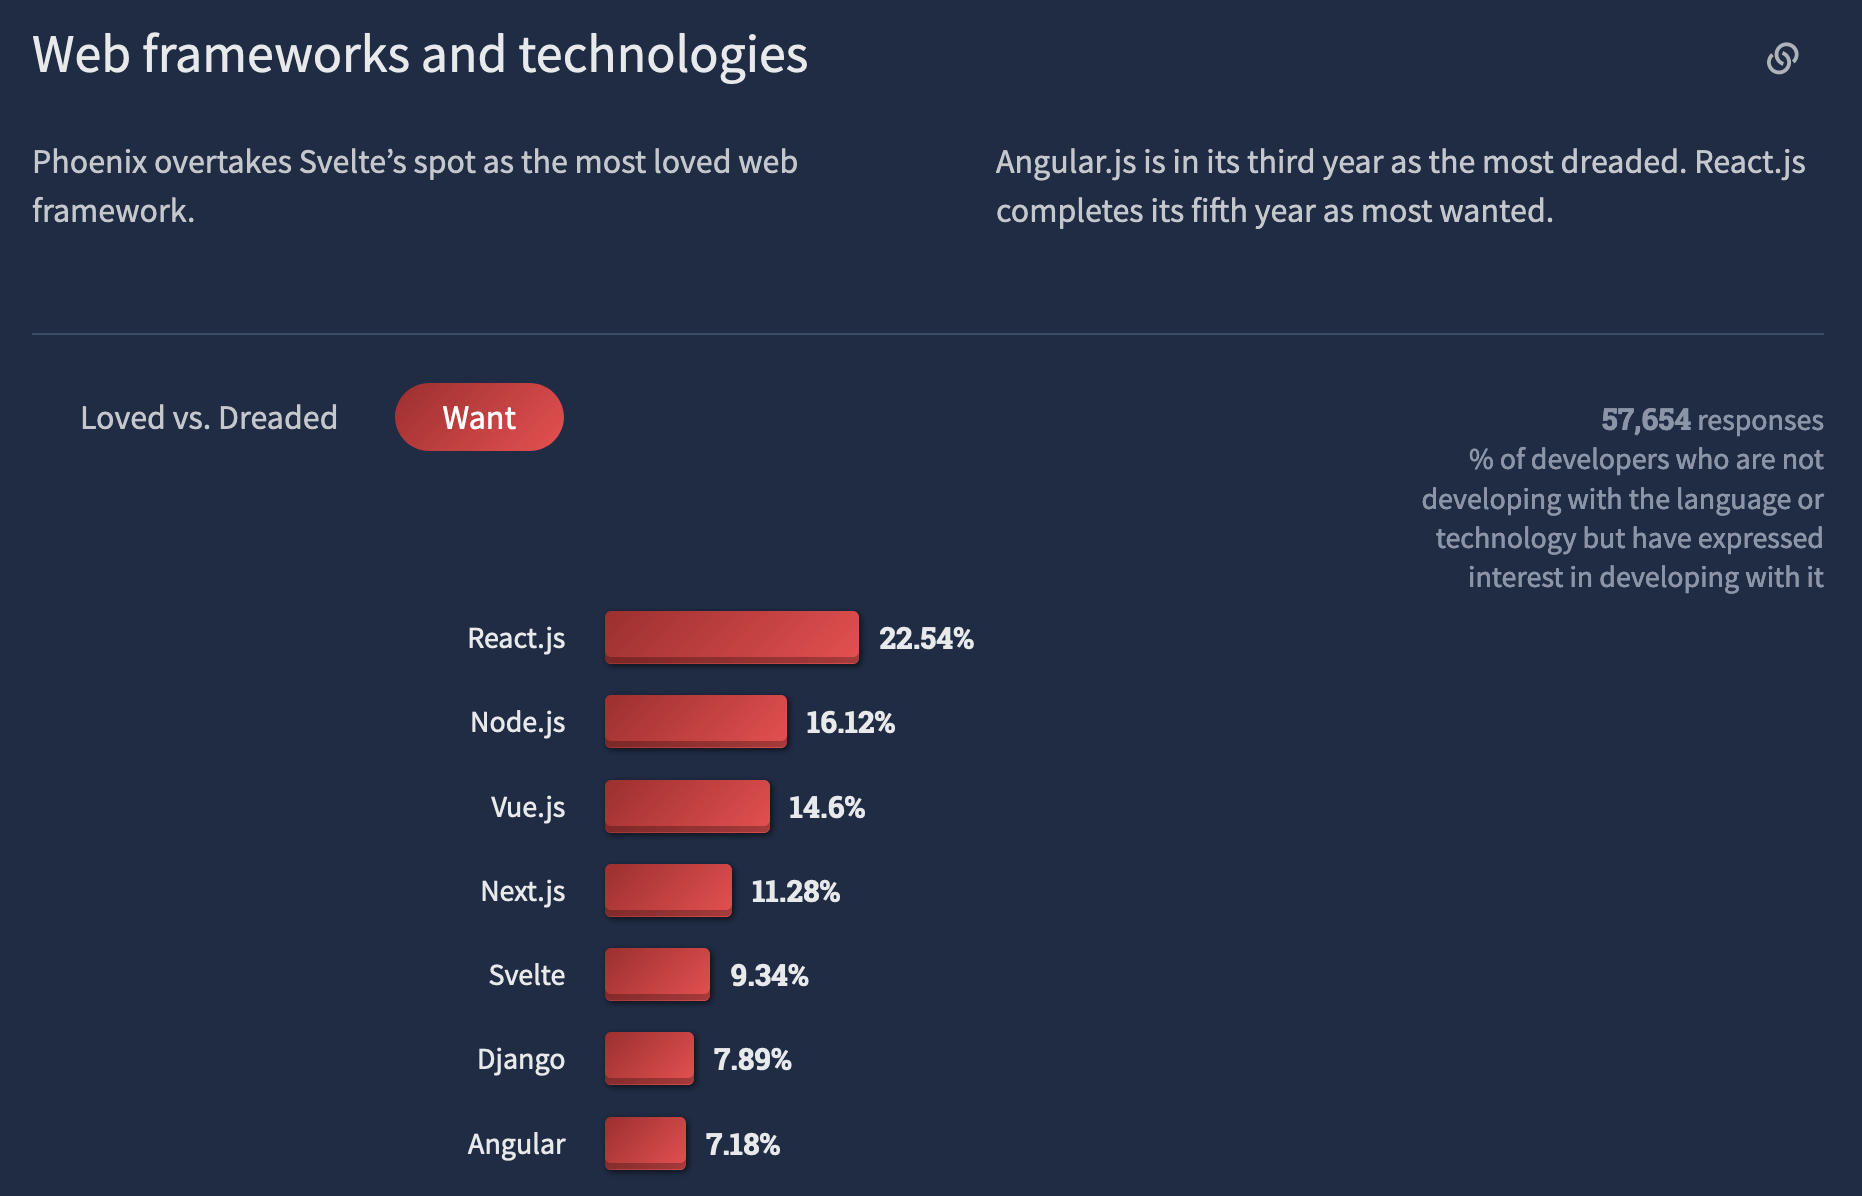 Most loved, dreaded, and wanted web frameworks and technologies